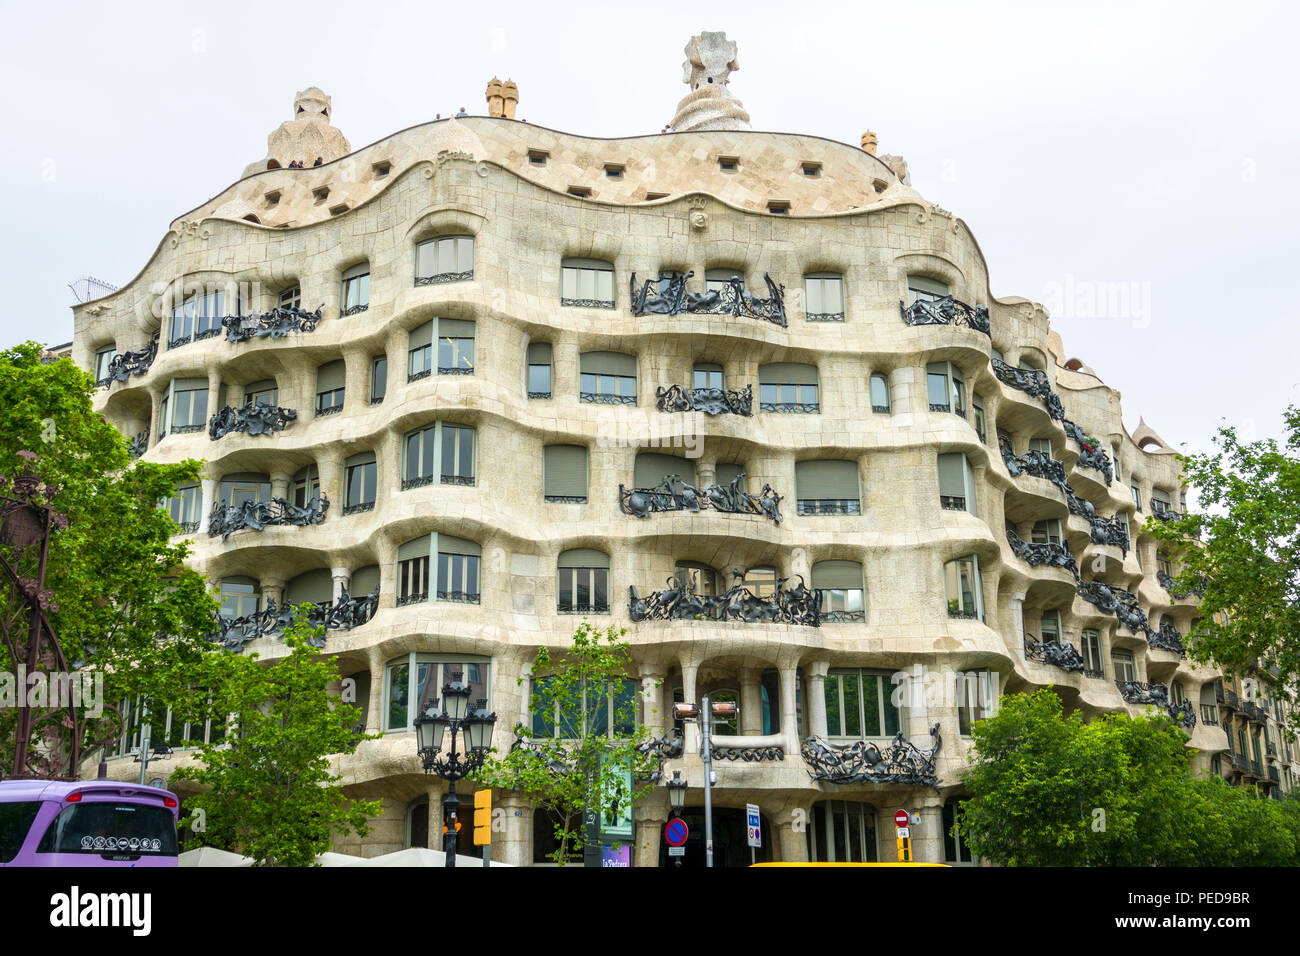 Casa Mila (La Pedrerea) Barcelona Spain the cosmopolitan capital of Spain’s Catalonia region, is known for its art and architecture. The fantastical S Stock Photo